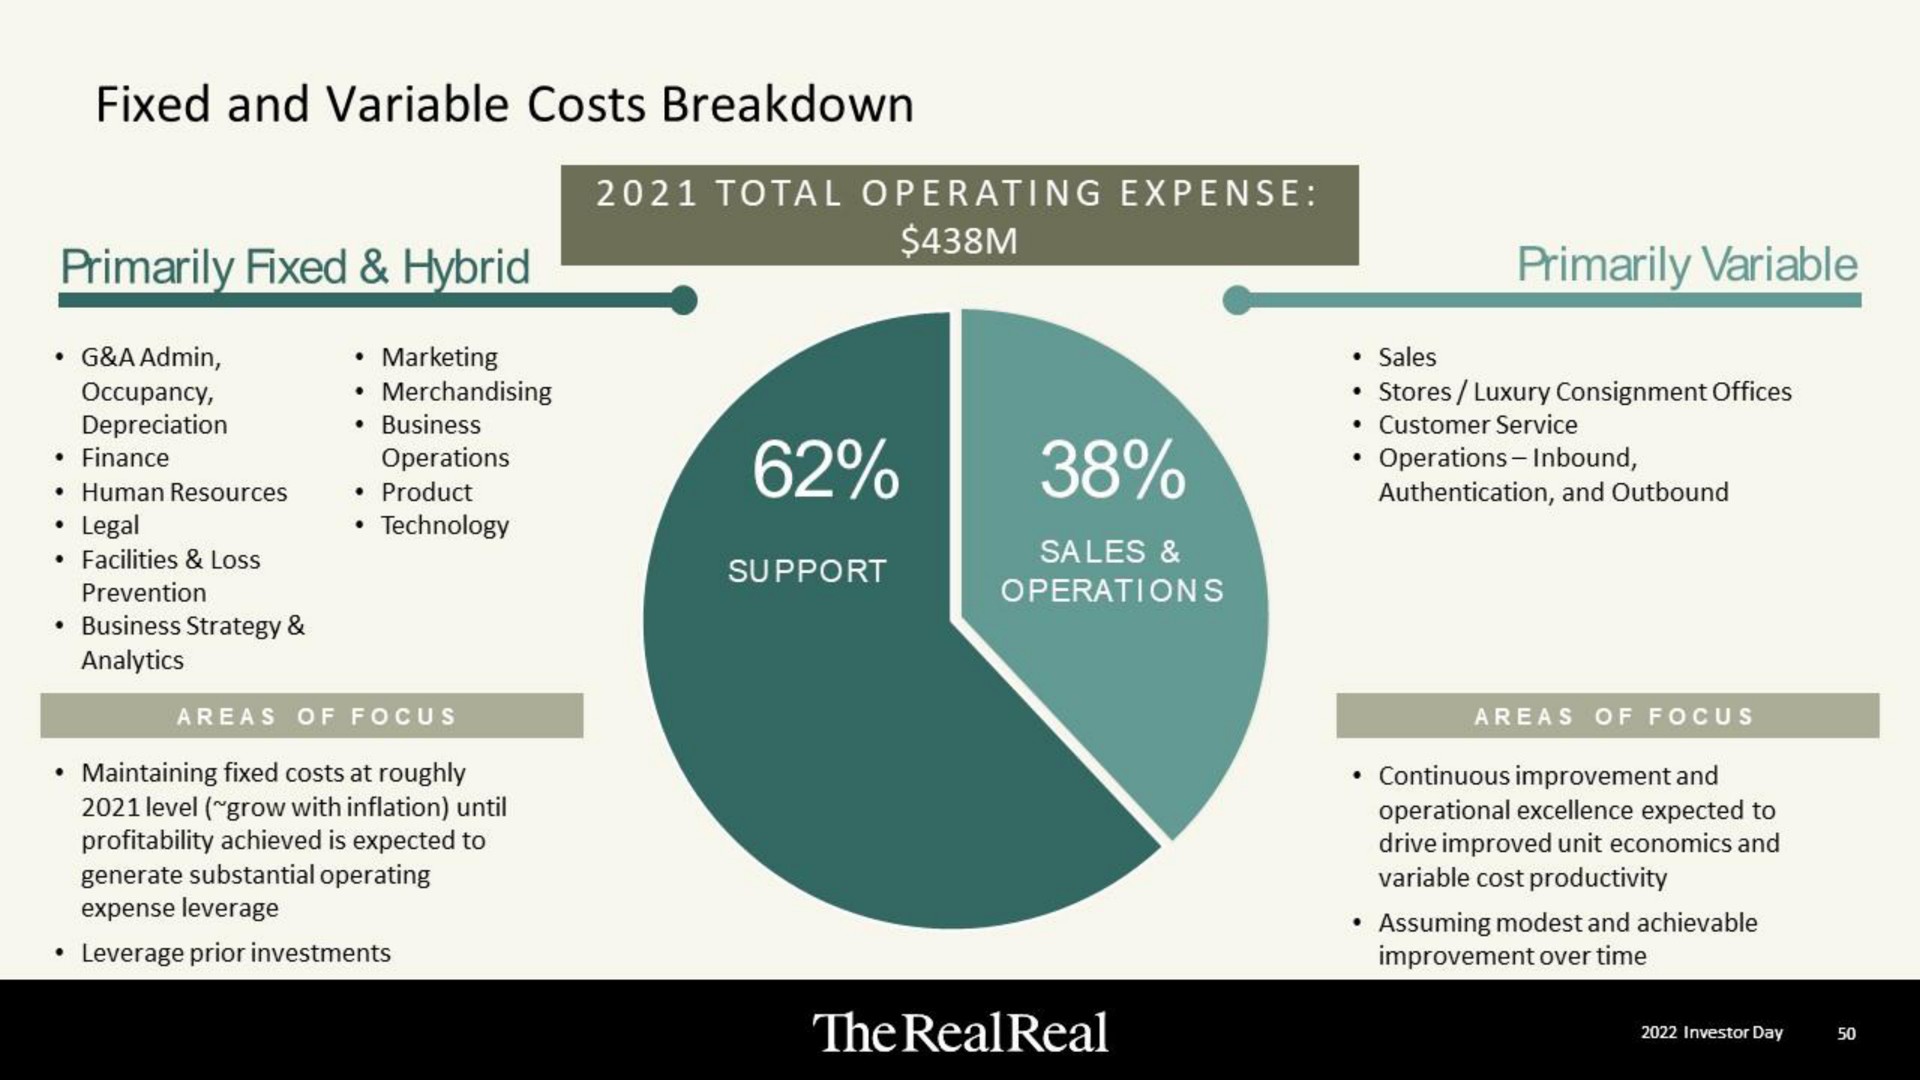 fixed and variable costs breakdown the primarily variable | The RealReal